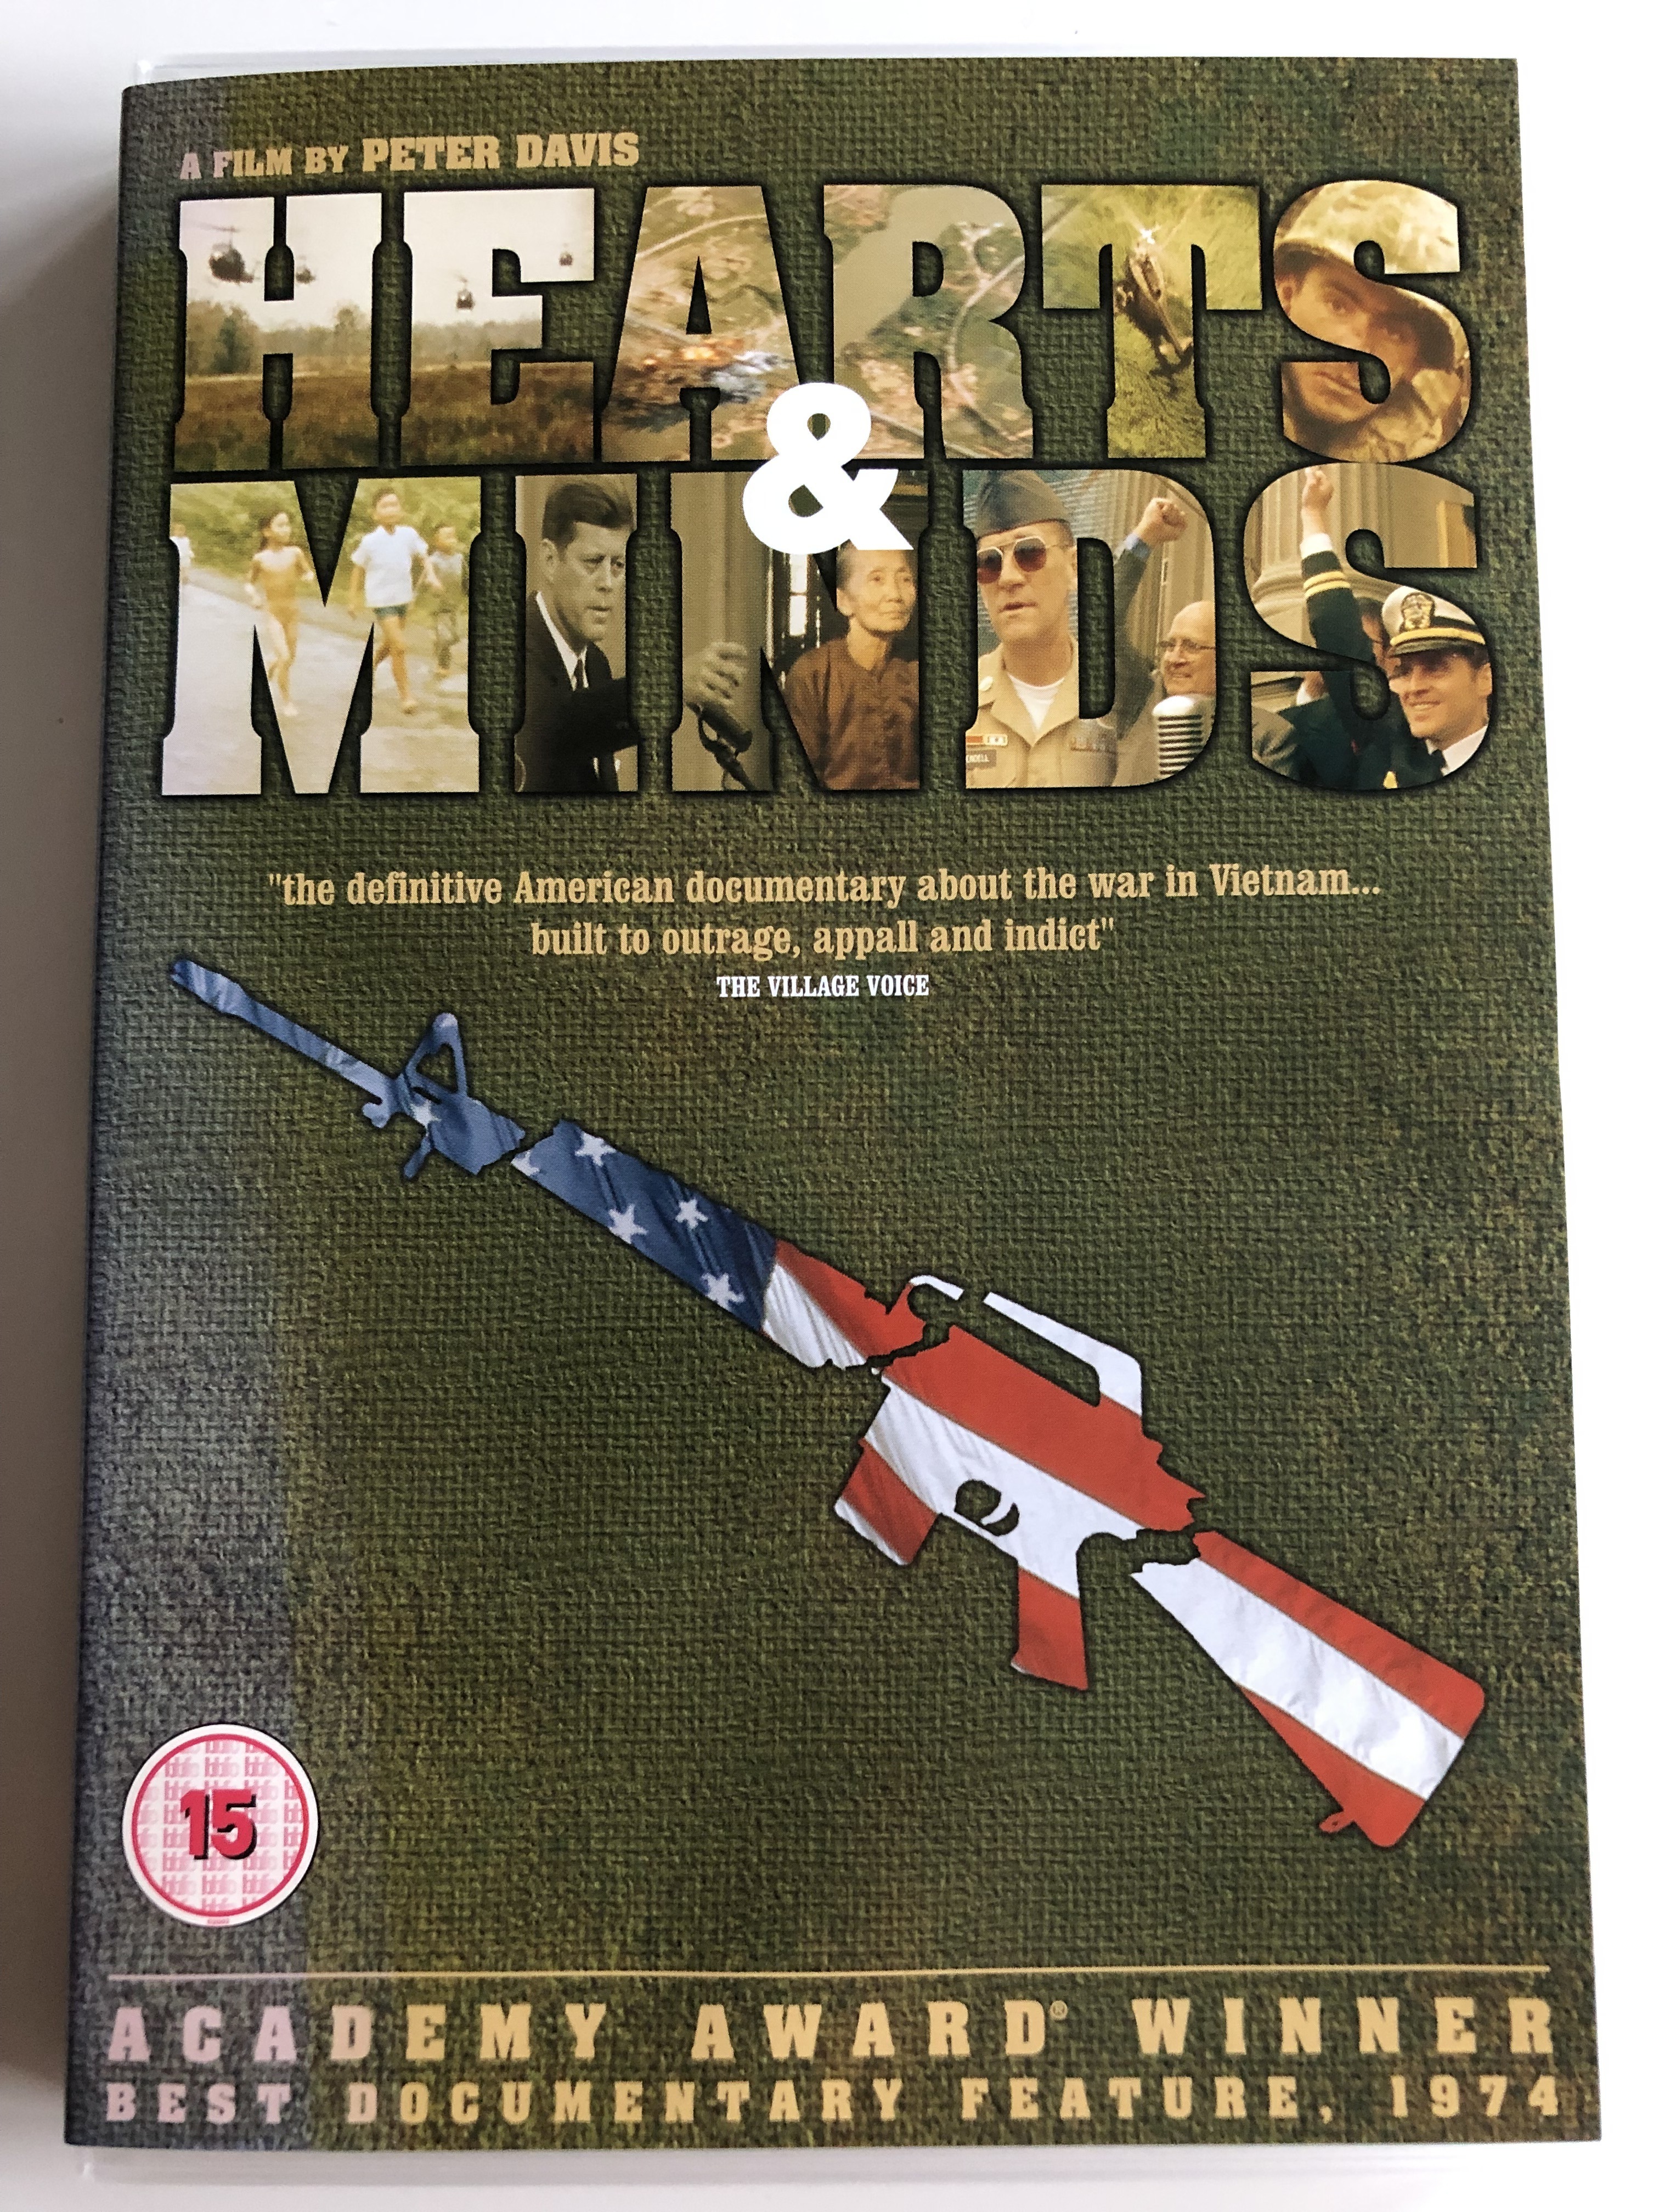 hearts-minds-dvd-1974-directed-by-peter-davis-the-definitive-american-documentary-about-the-war-in-vietnam-built-to-outrage-appall-and-indict-best-documentary-1974-academy-award-1-.jpg